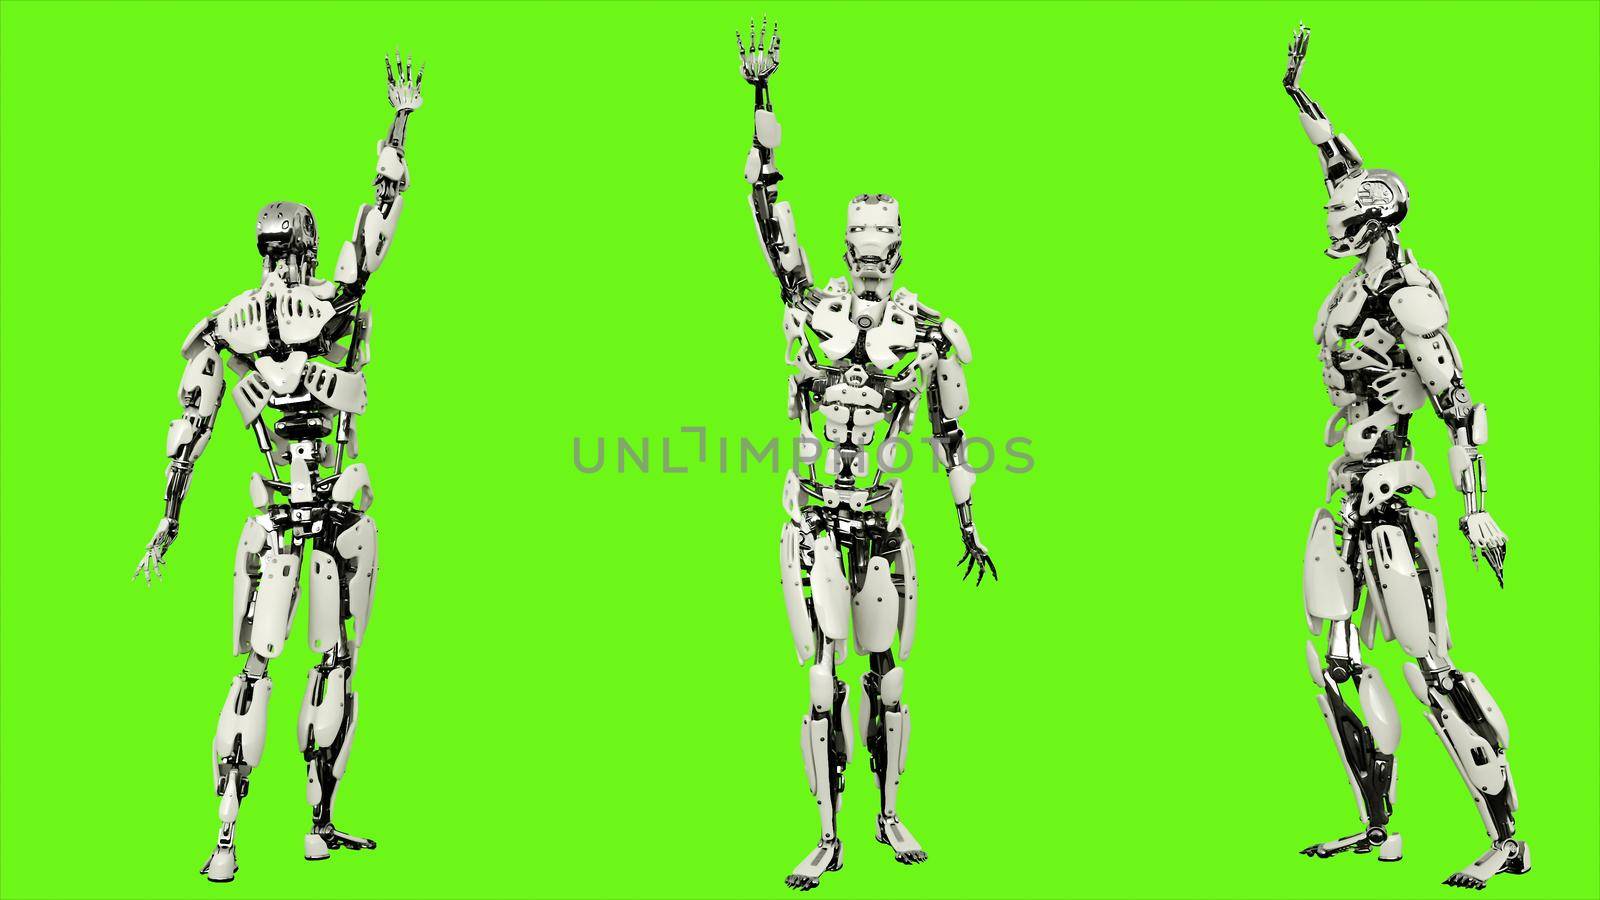 Robot android is waving a greeting. Illustration on green screen background.